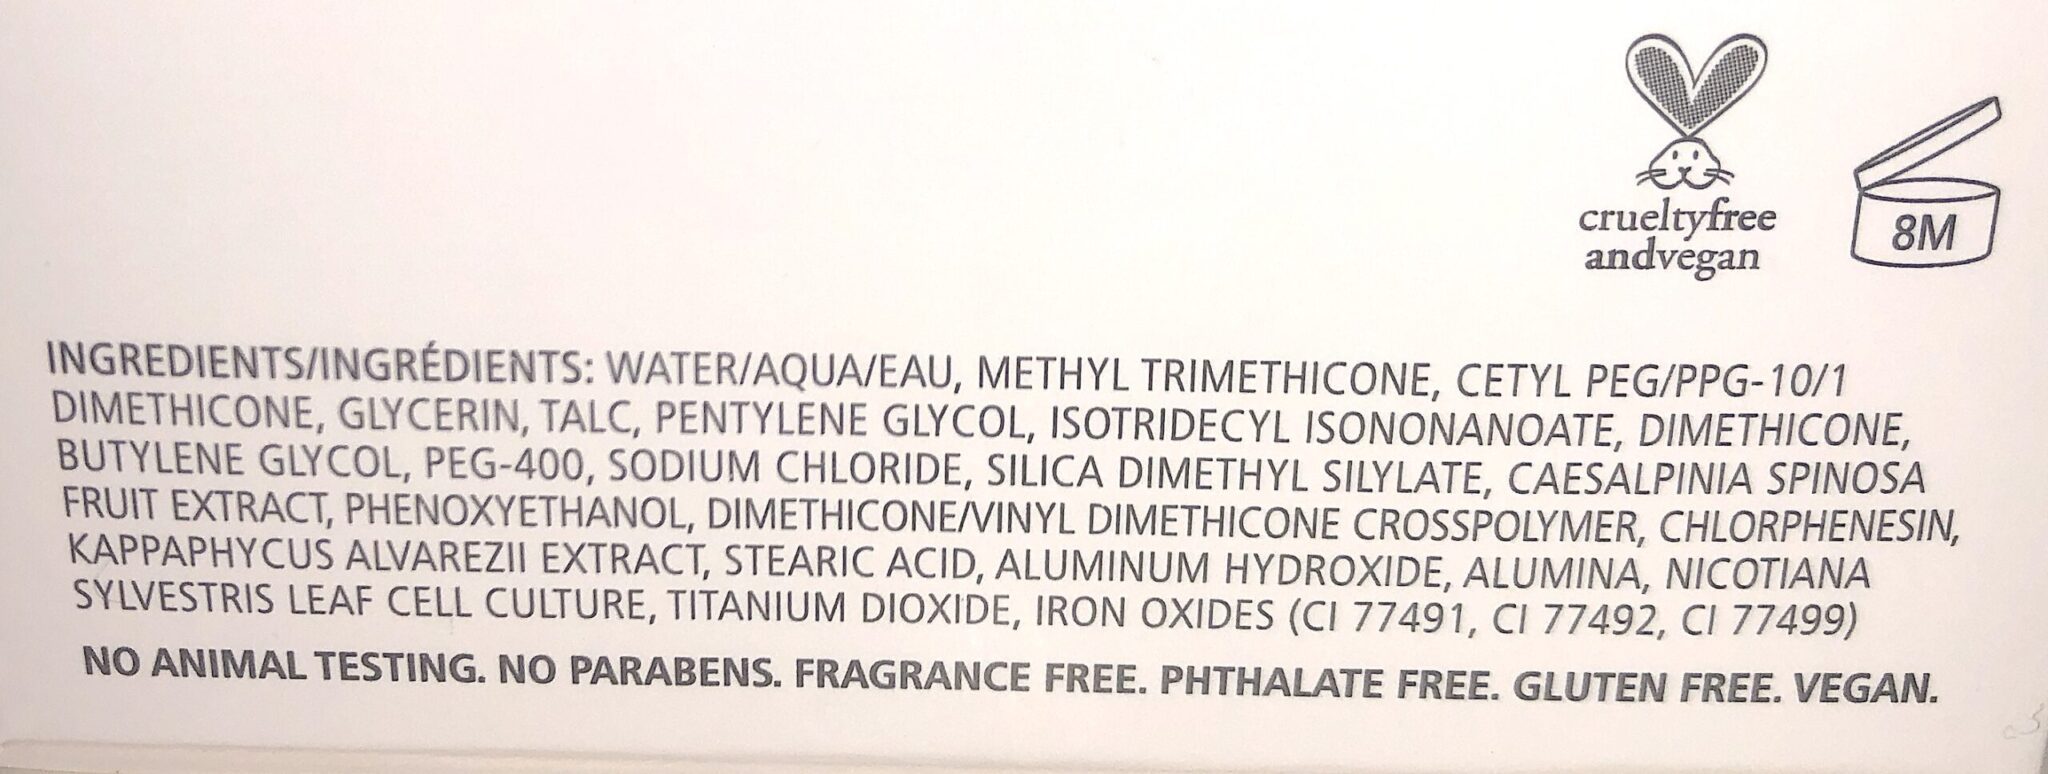 THE CHANTECAILLE FUTURE SKIN CUSHION INGREDIENTS